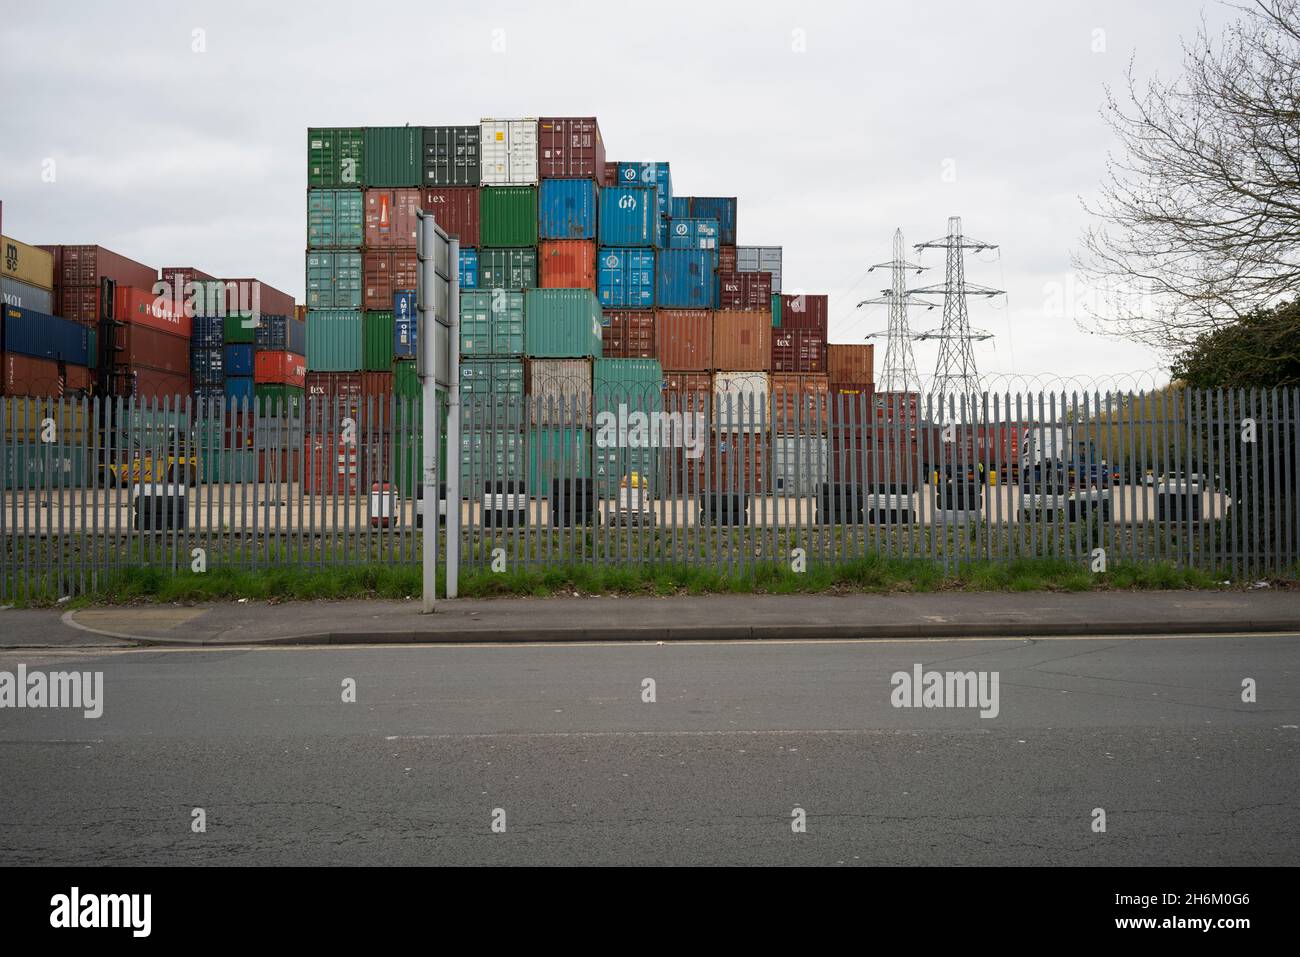 Shipping containers stacked in a holding zone Stock Photo